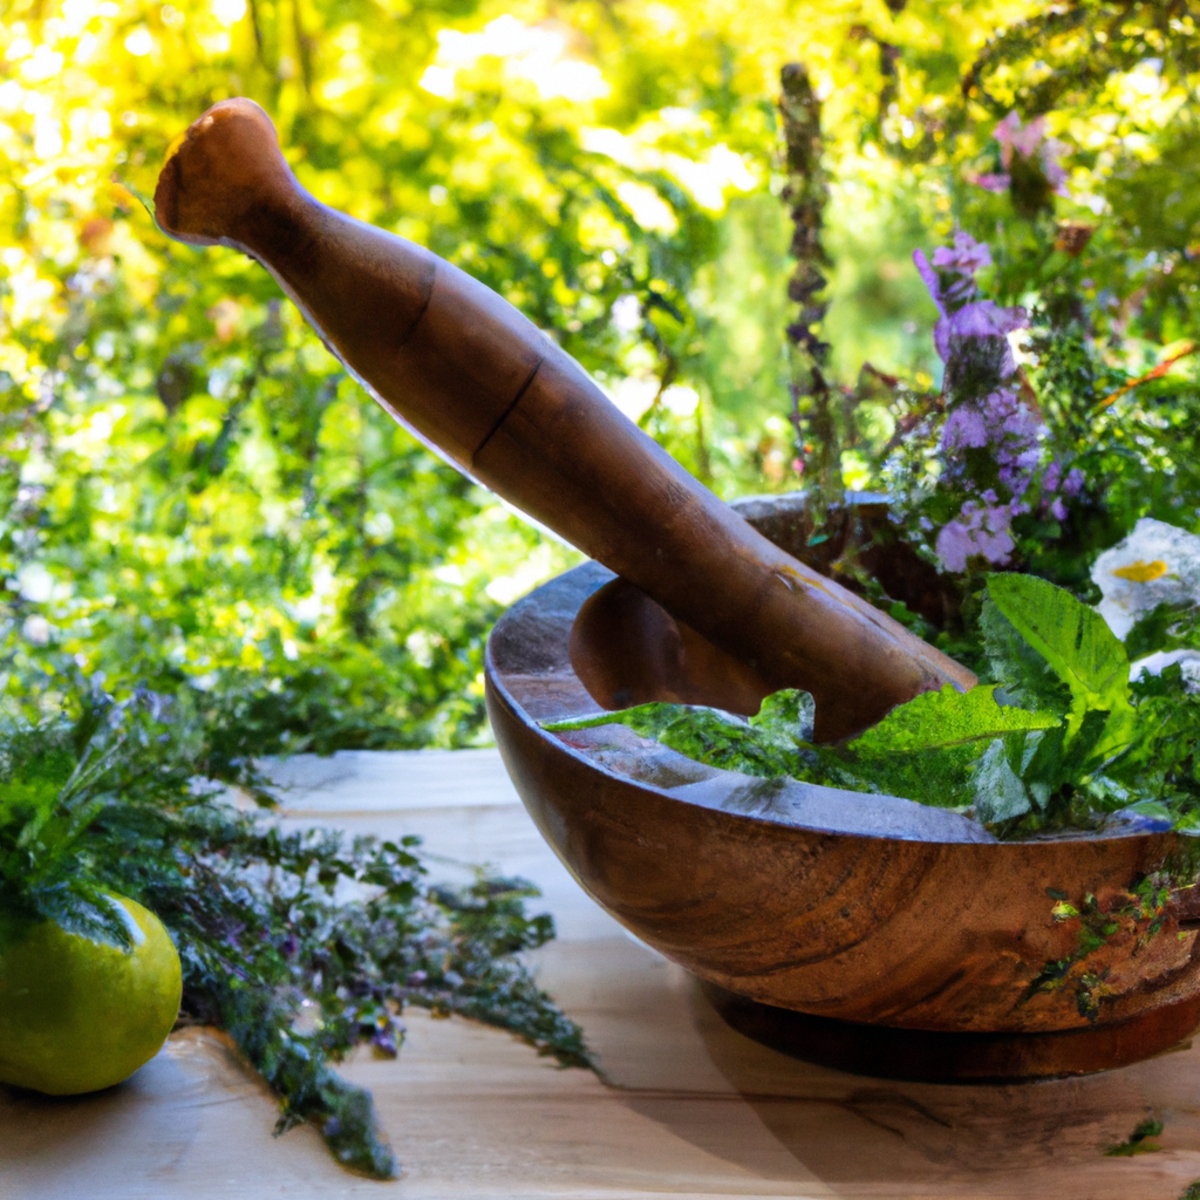 Serene garden scene with vibrant herbs, mortar and pestle, sunlight, and gentle breeze, embodying natural healing.